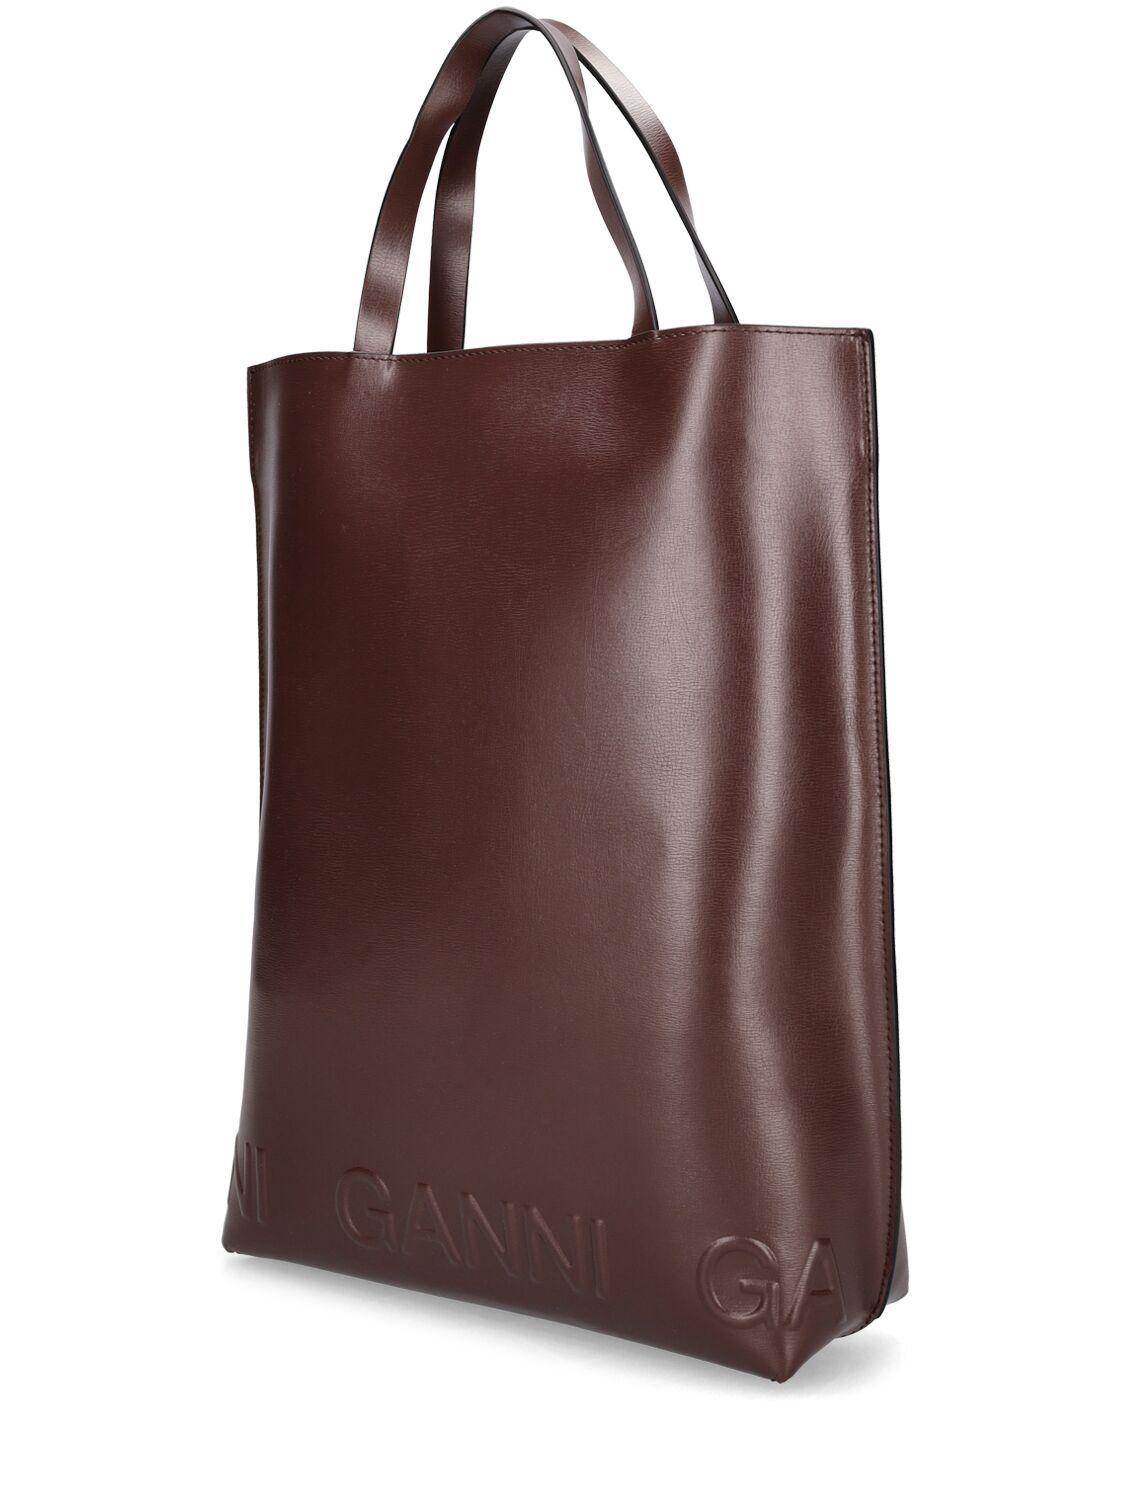 Ganni Medium Banner Recycled Leather Tote Bag in Brown | Lyst